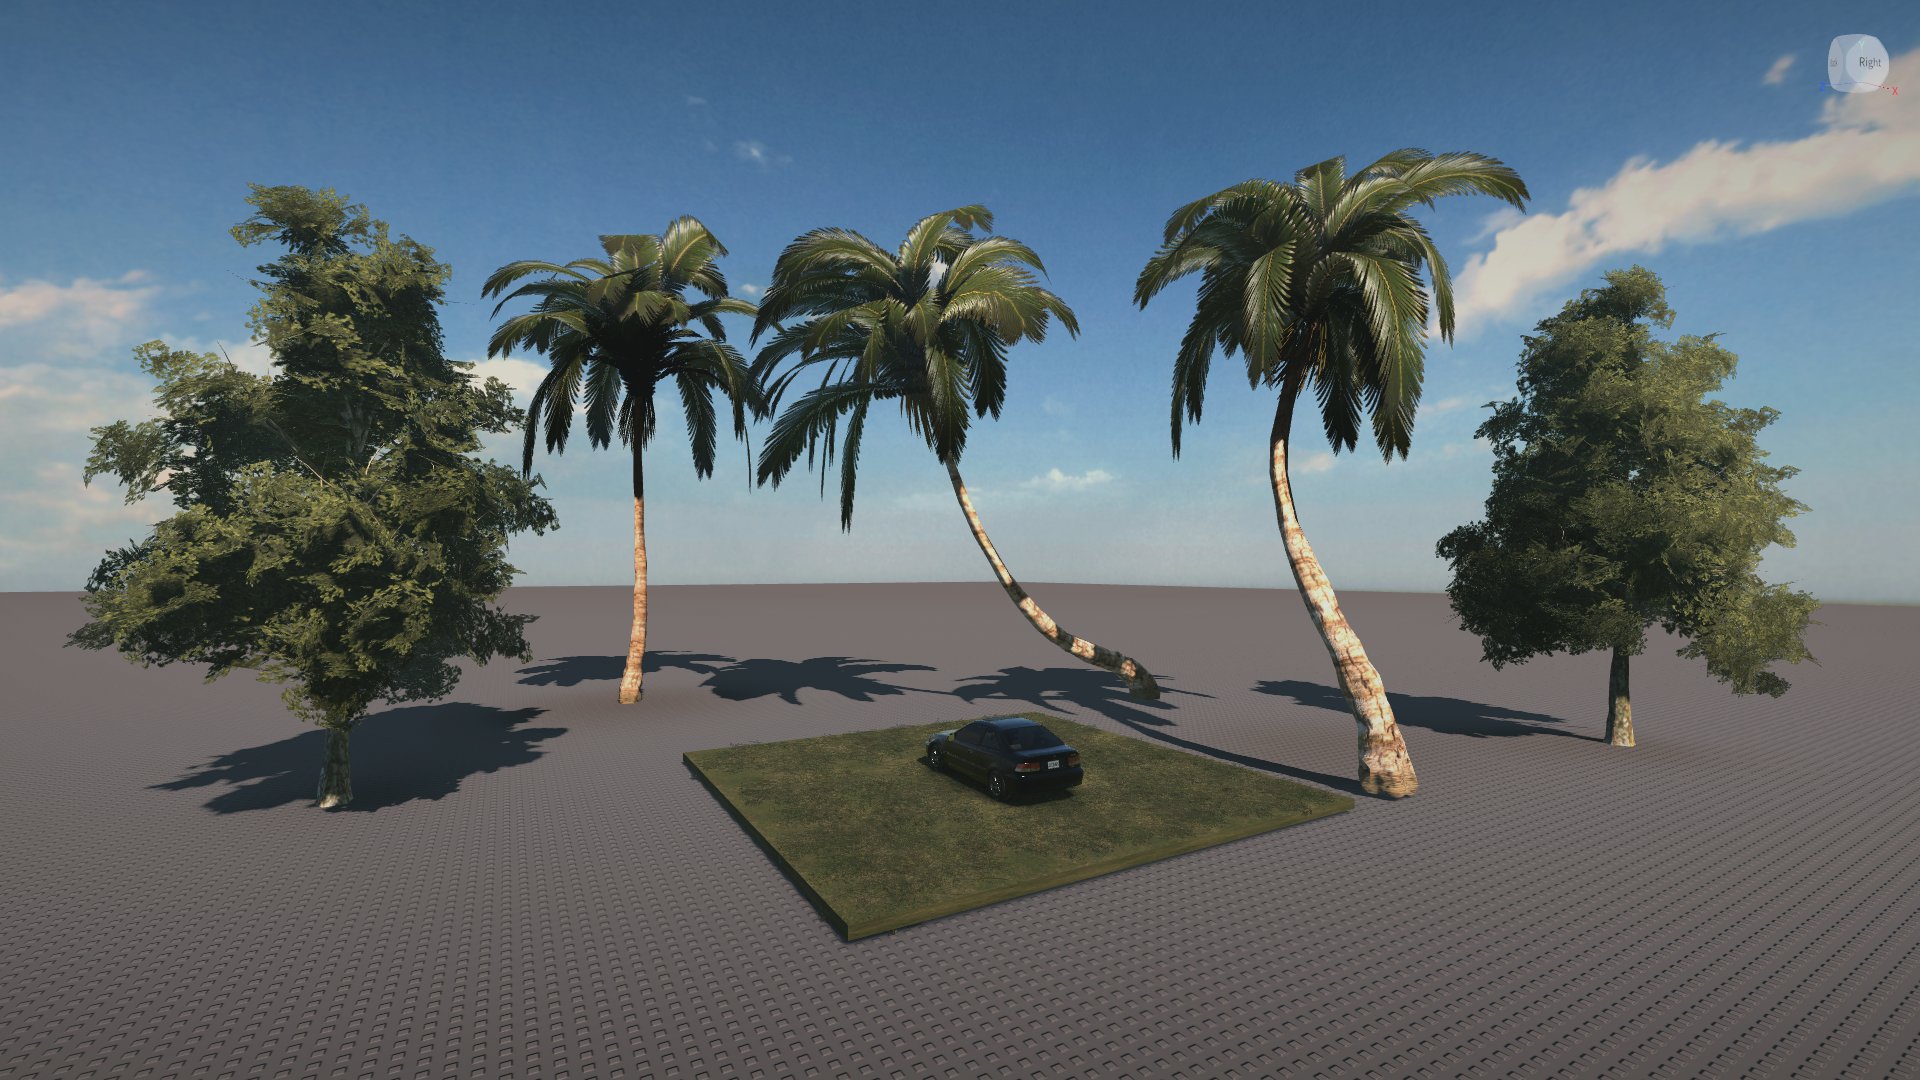 Lgtbloh On Twitter I Made My Own Nice Realistic Pbr Tree Assets Lol - realistic roblox grass with trees background